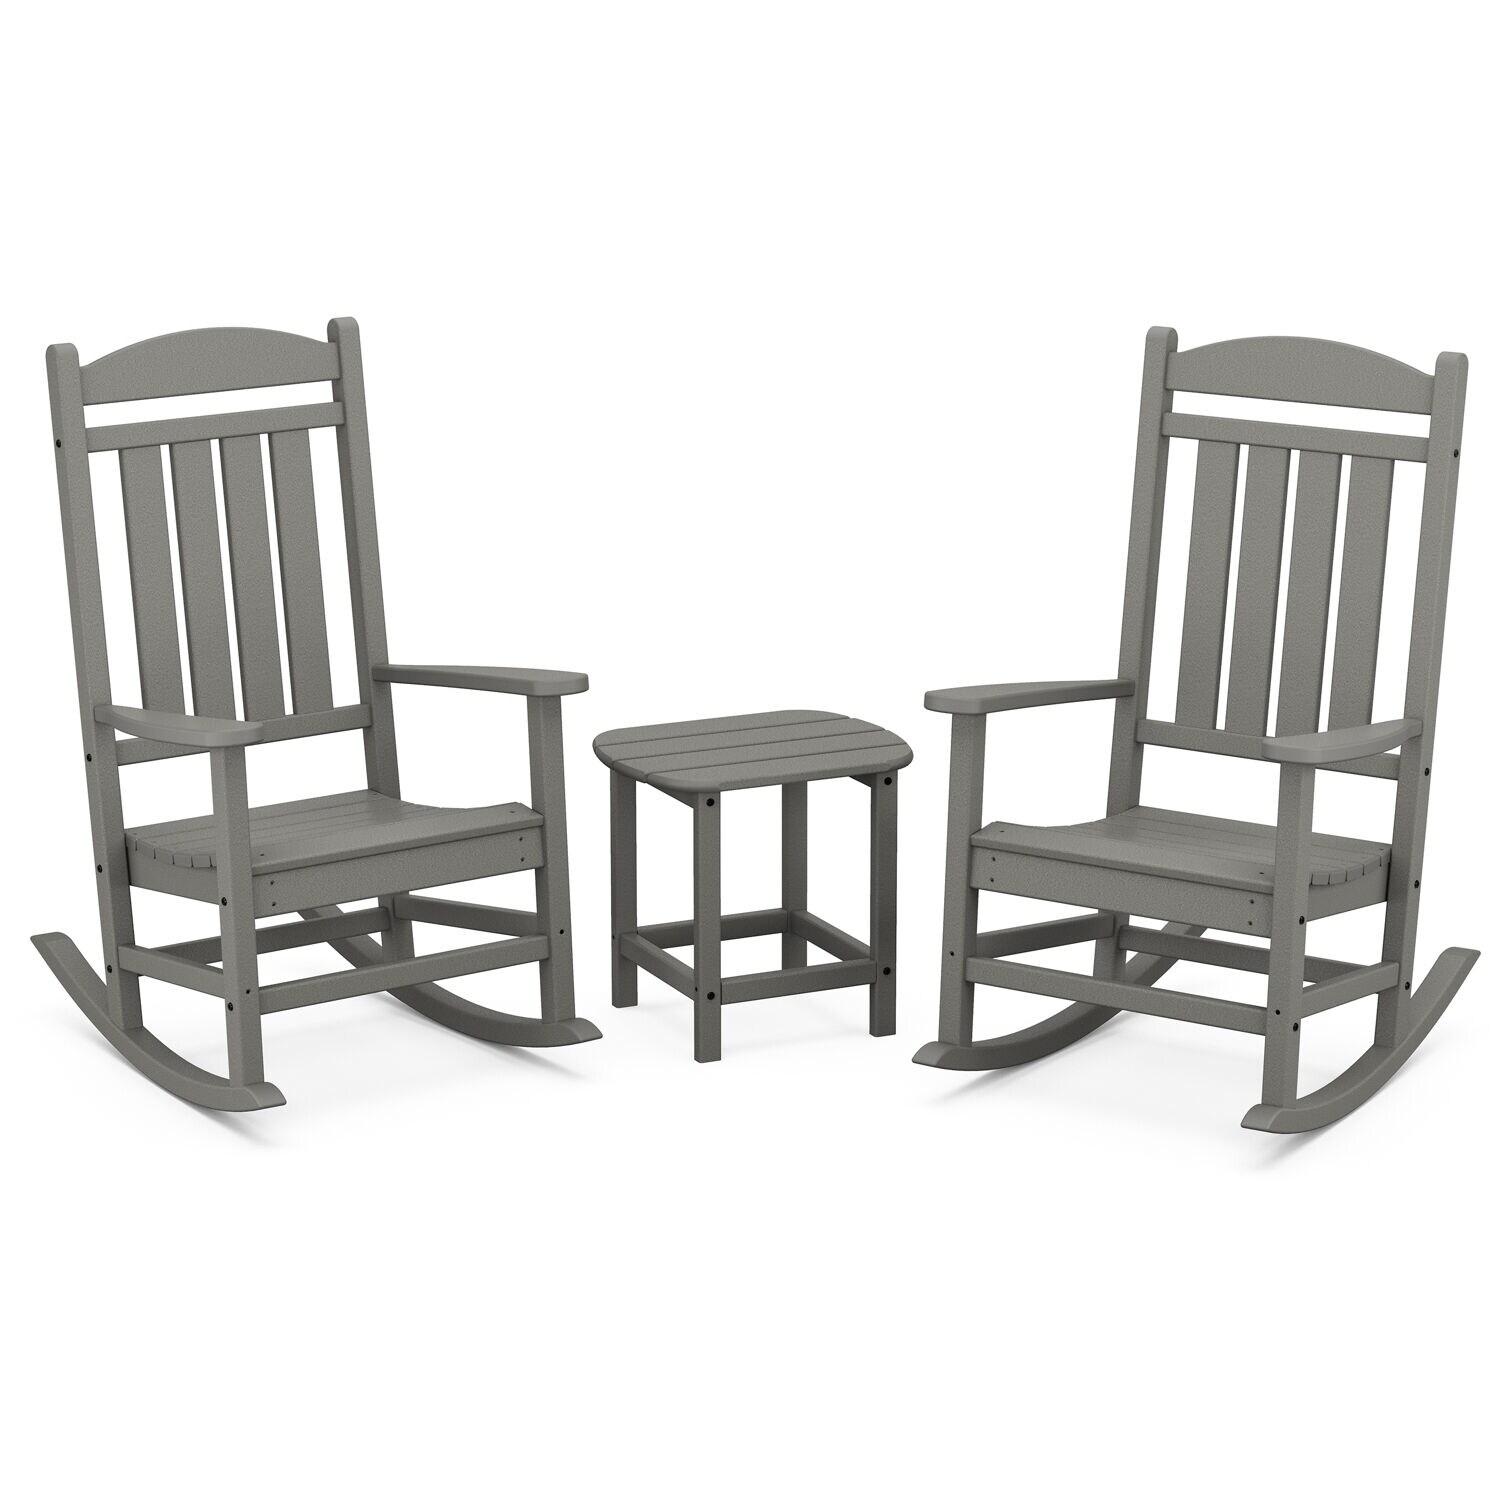 Hanover Pineapple Cay All Weather Porch Rocking Chair Set With 2 Rockers And An 19" X 15" Side Table In Grey